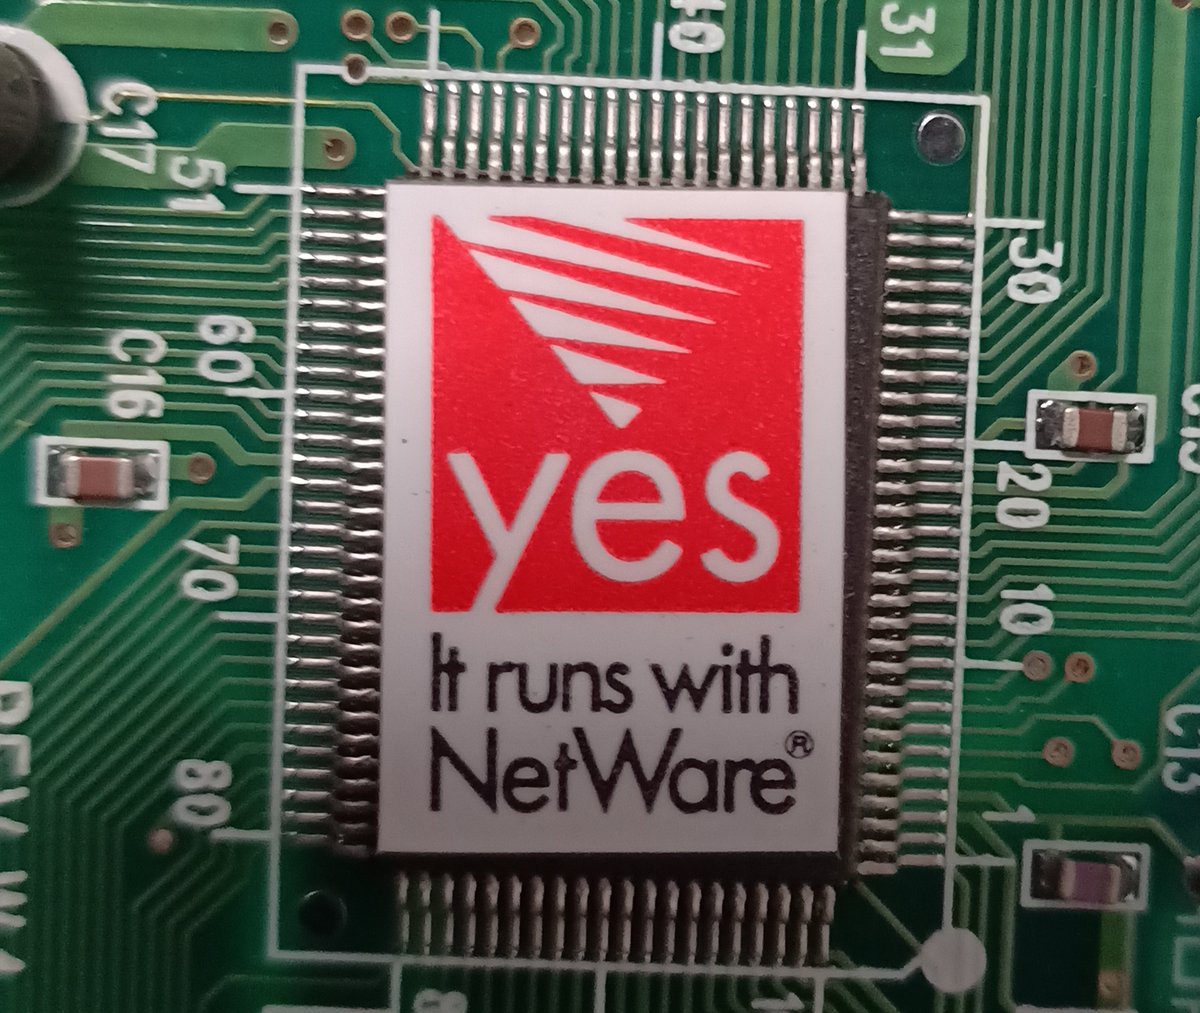 And yes, it runs with NetWare.